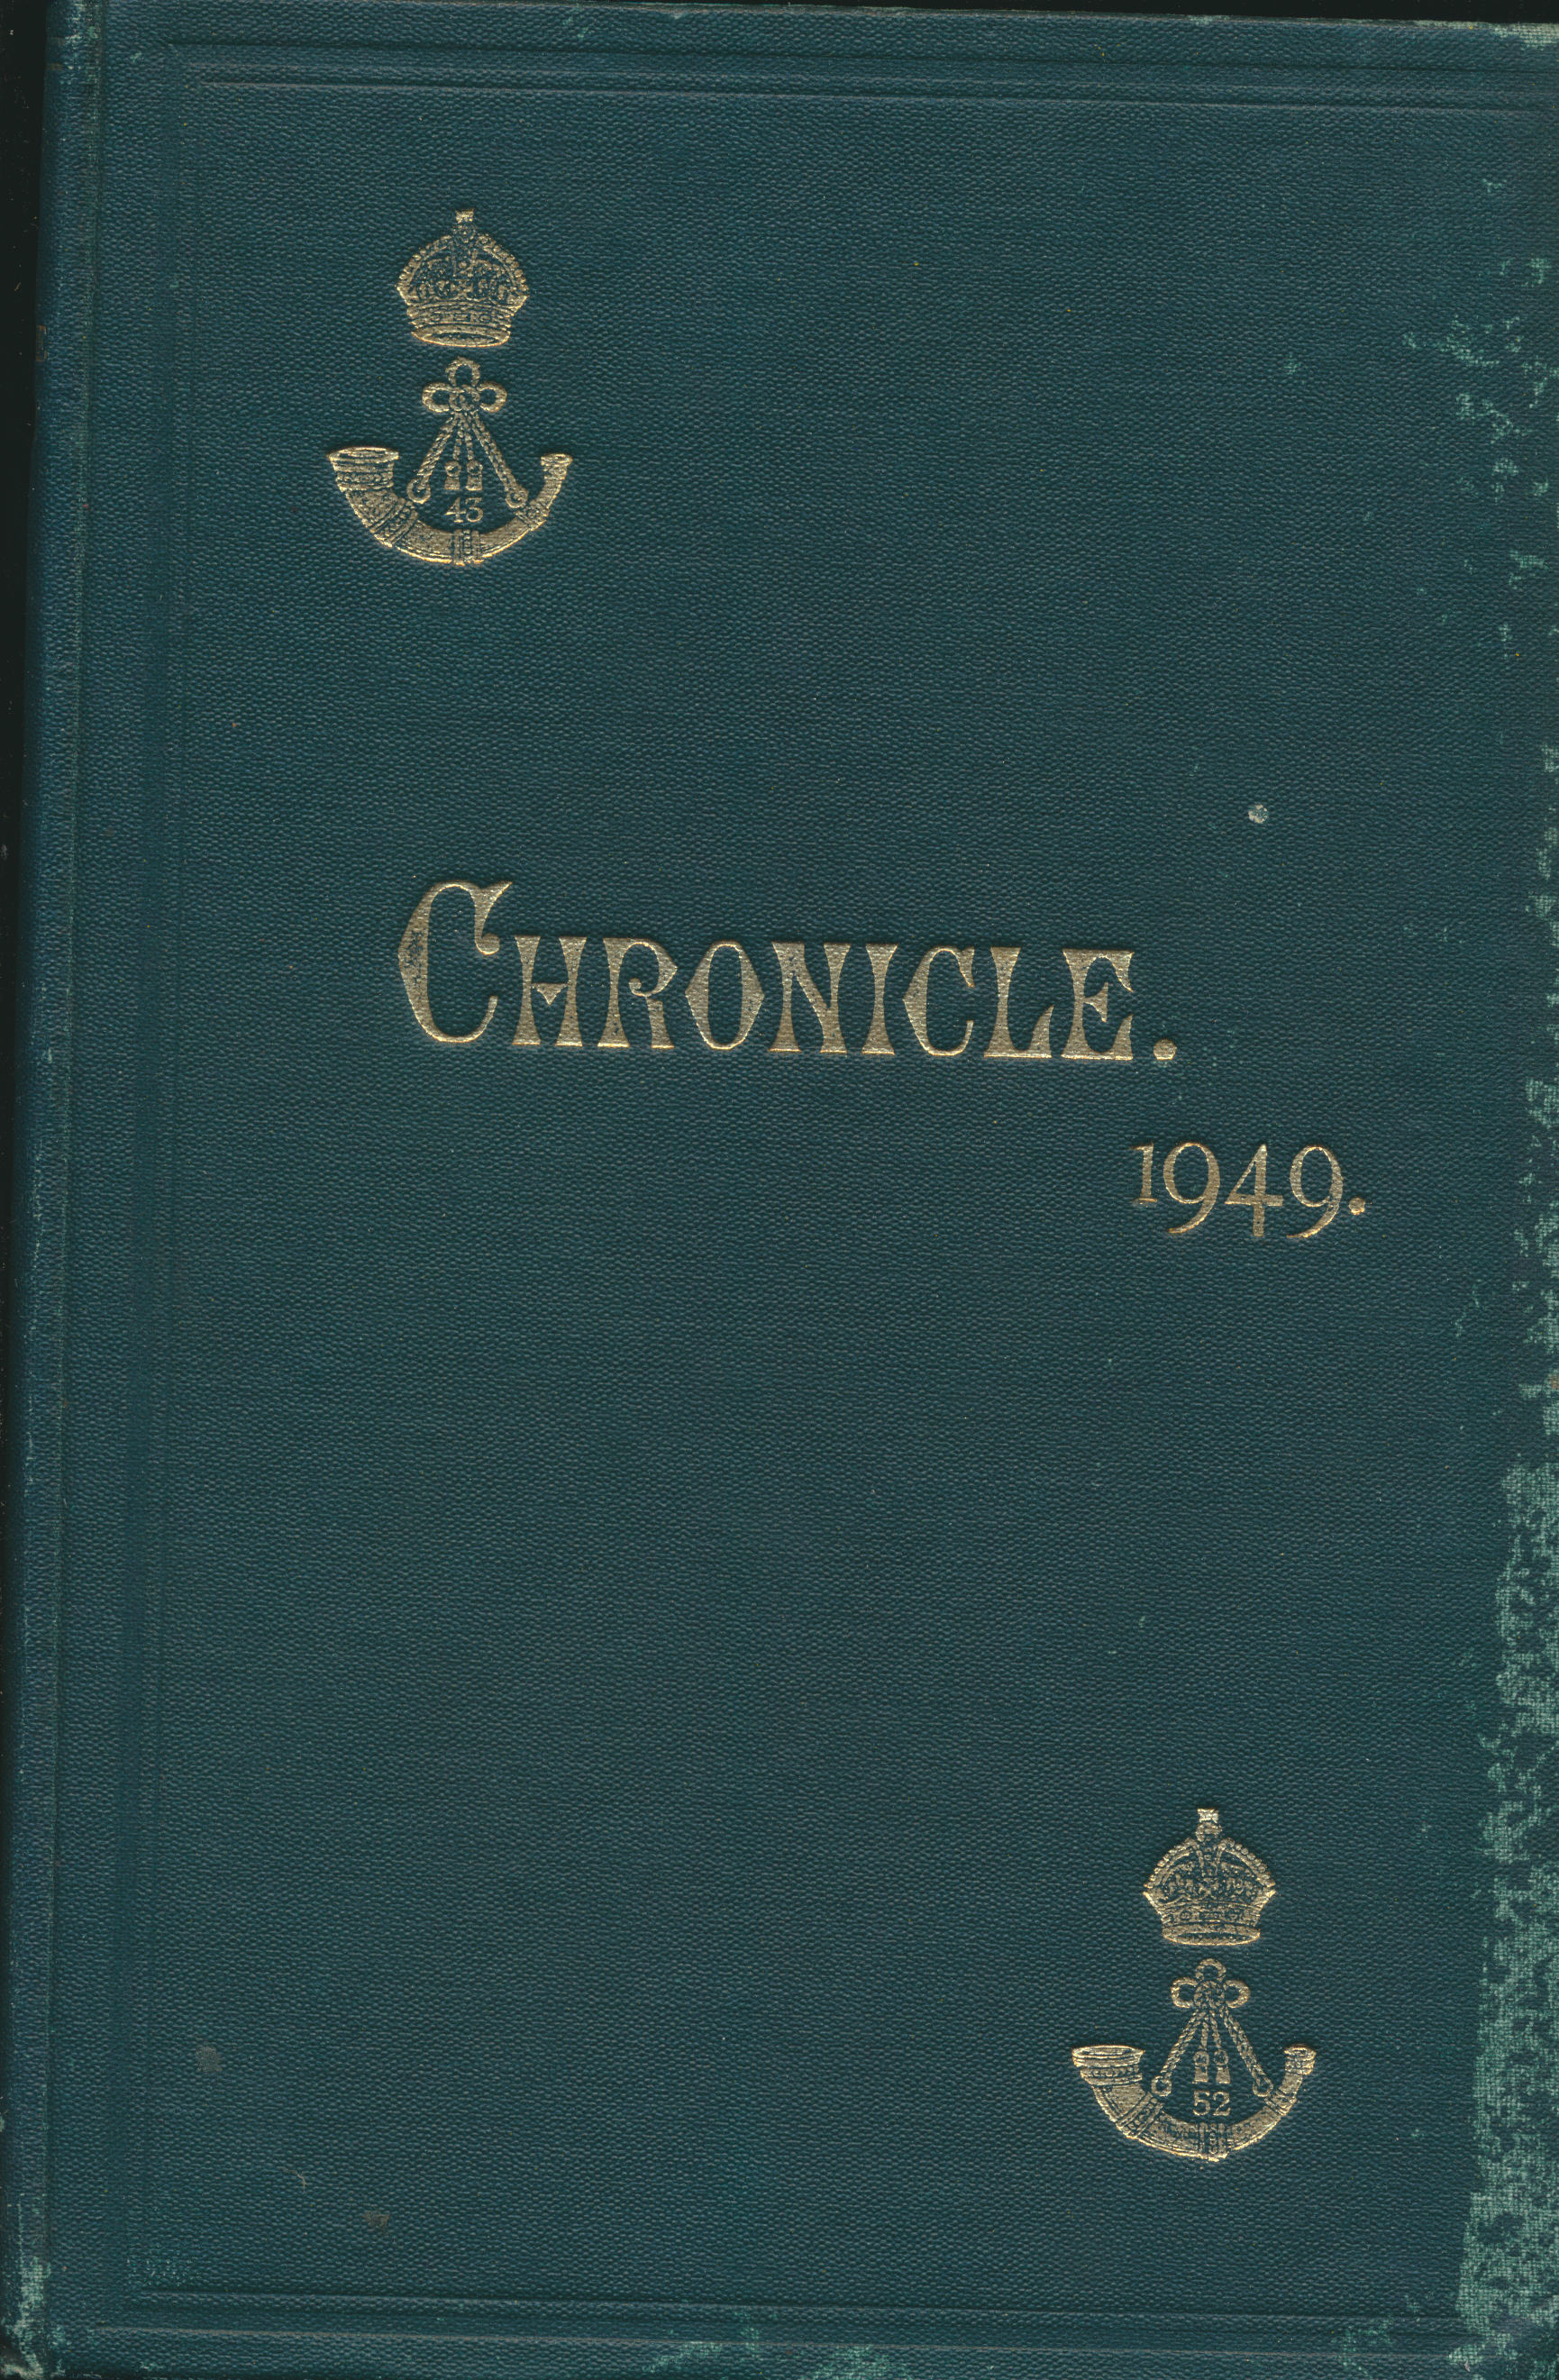 The Oxfordshire and Buckinghamshire Light Infantry Chronicle 1949